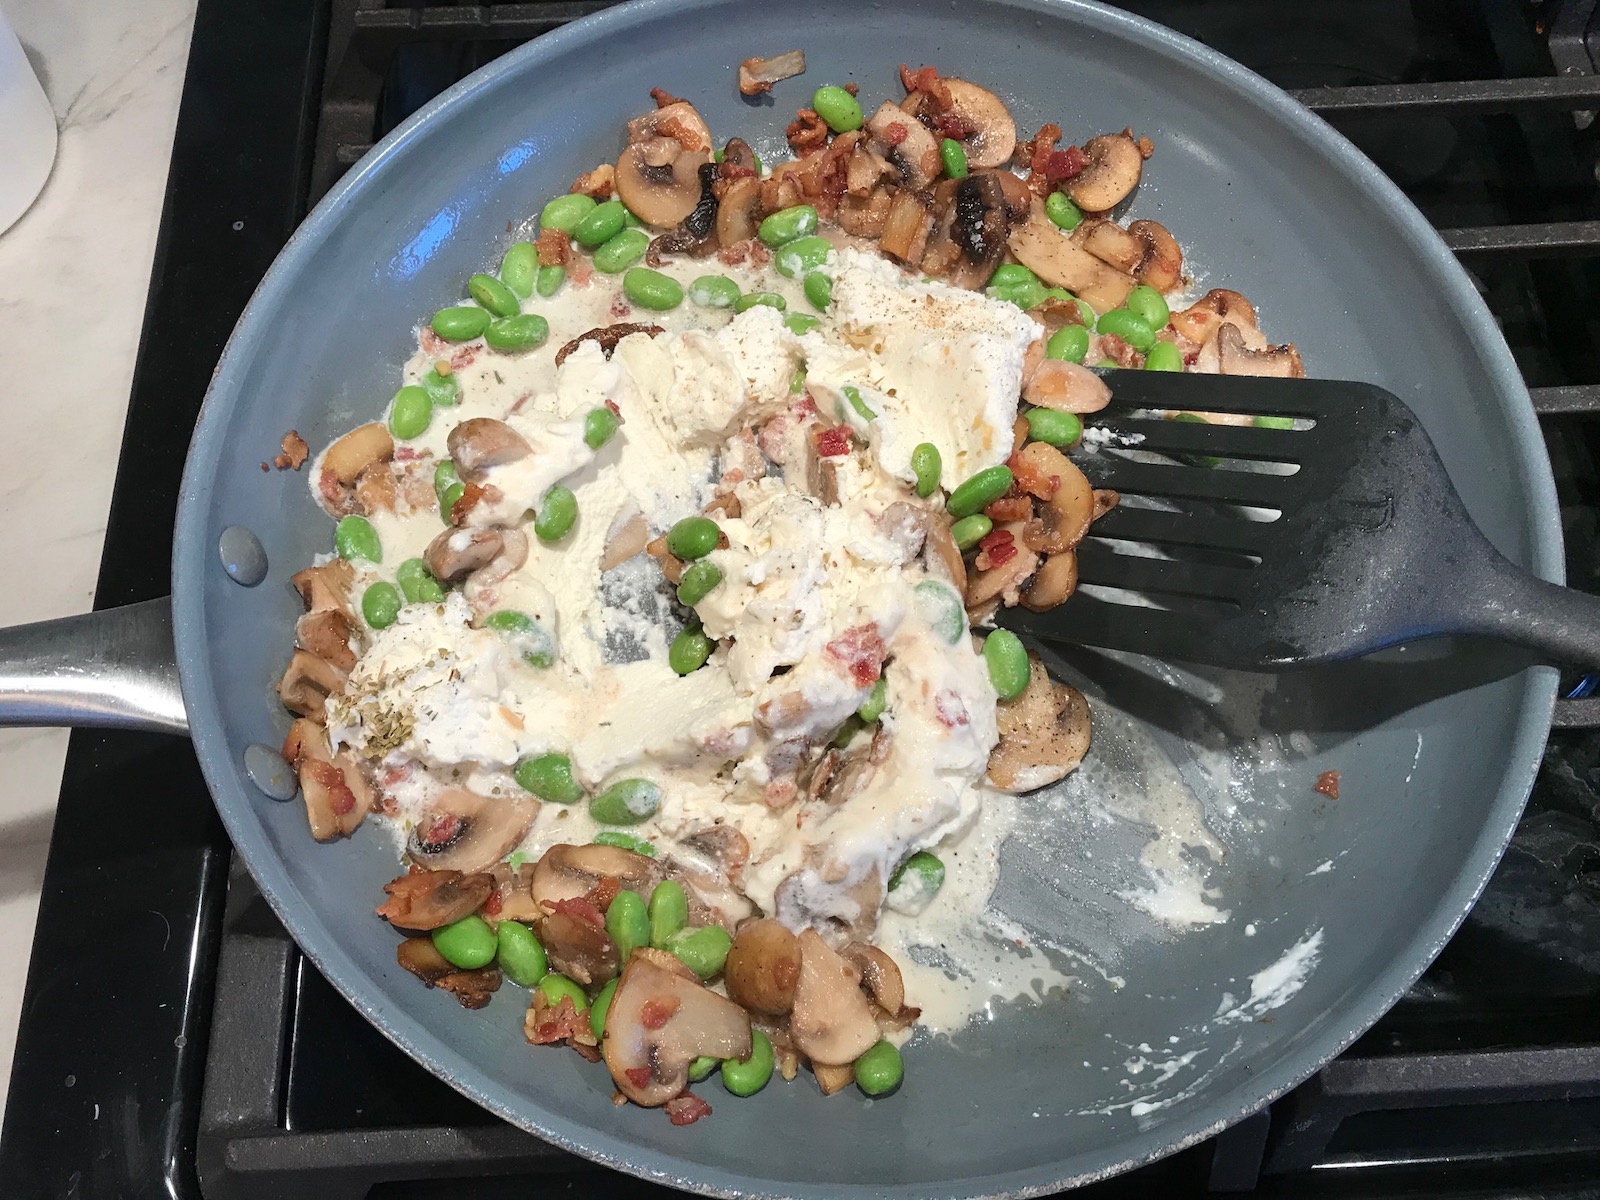 Spatula mixing Ricotta sauce with Bacon, Mushroom Sauce in pan on stove. It's creamy, rich, decadent, comforting, and downright delicious!